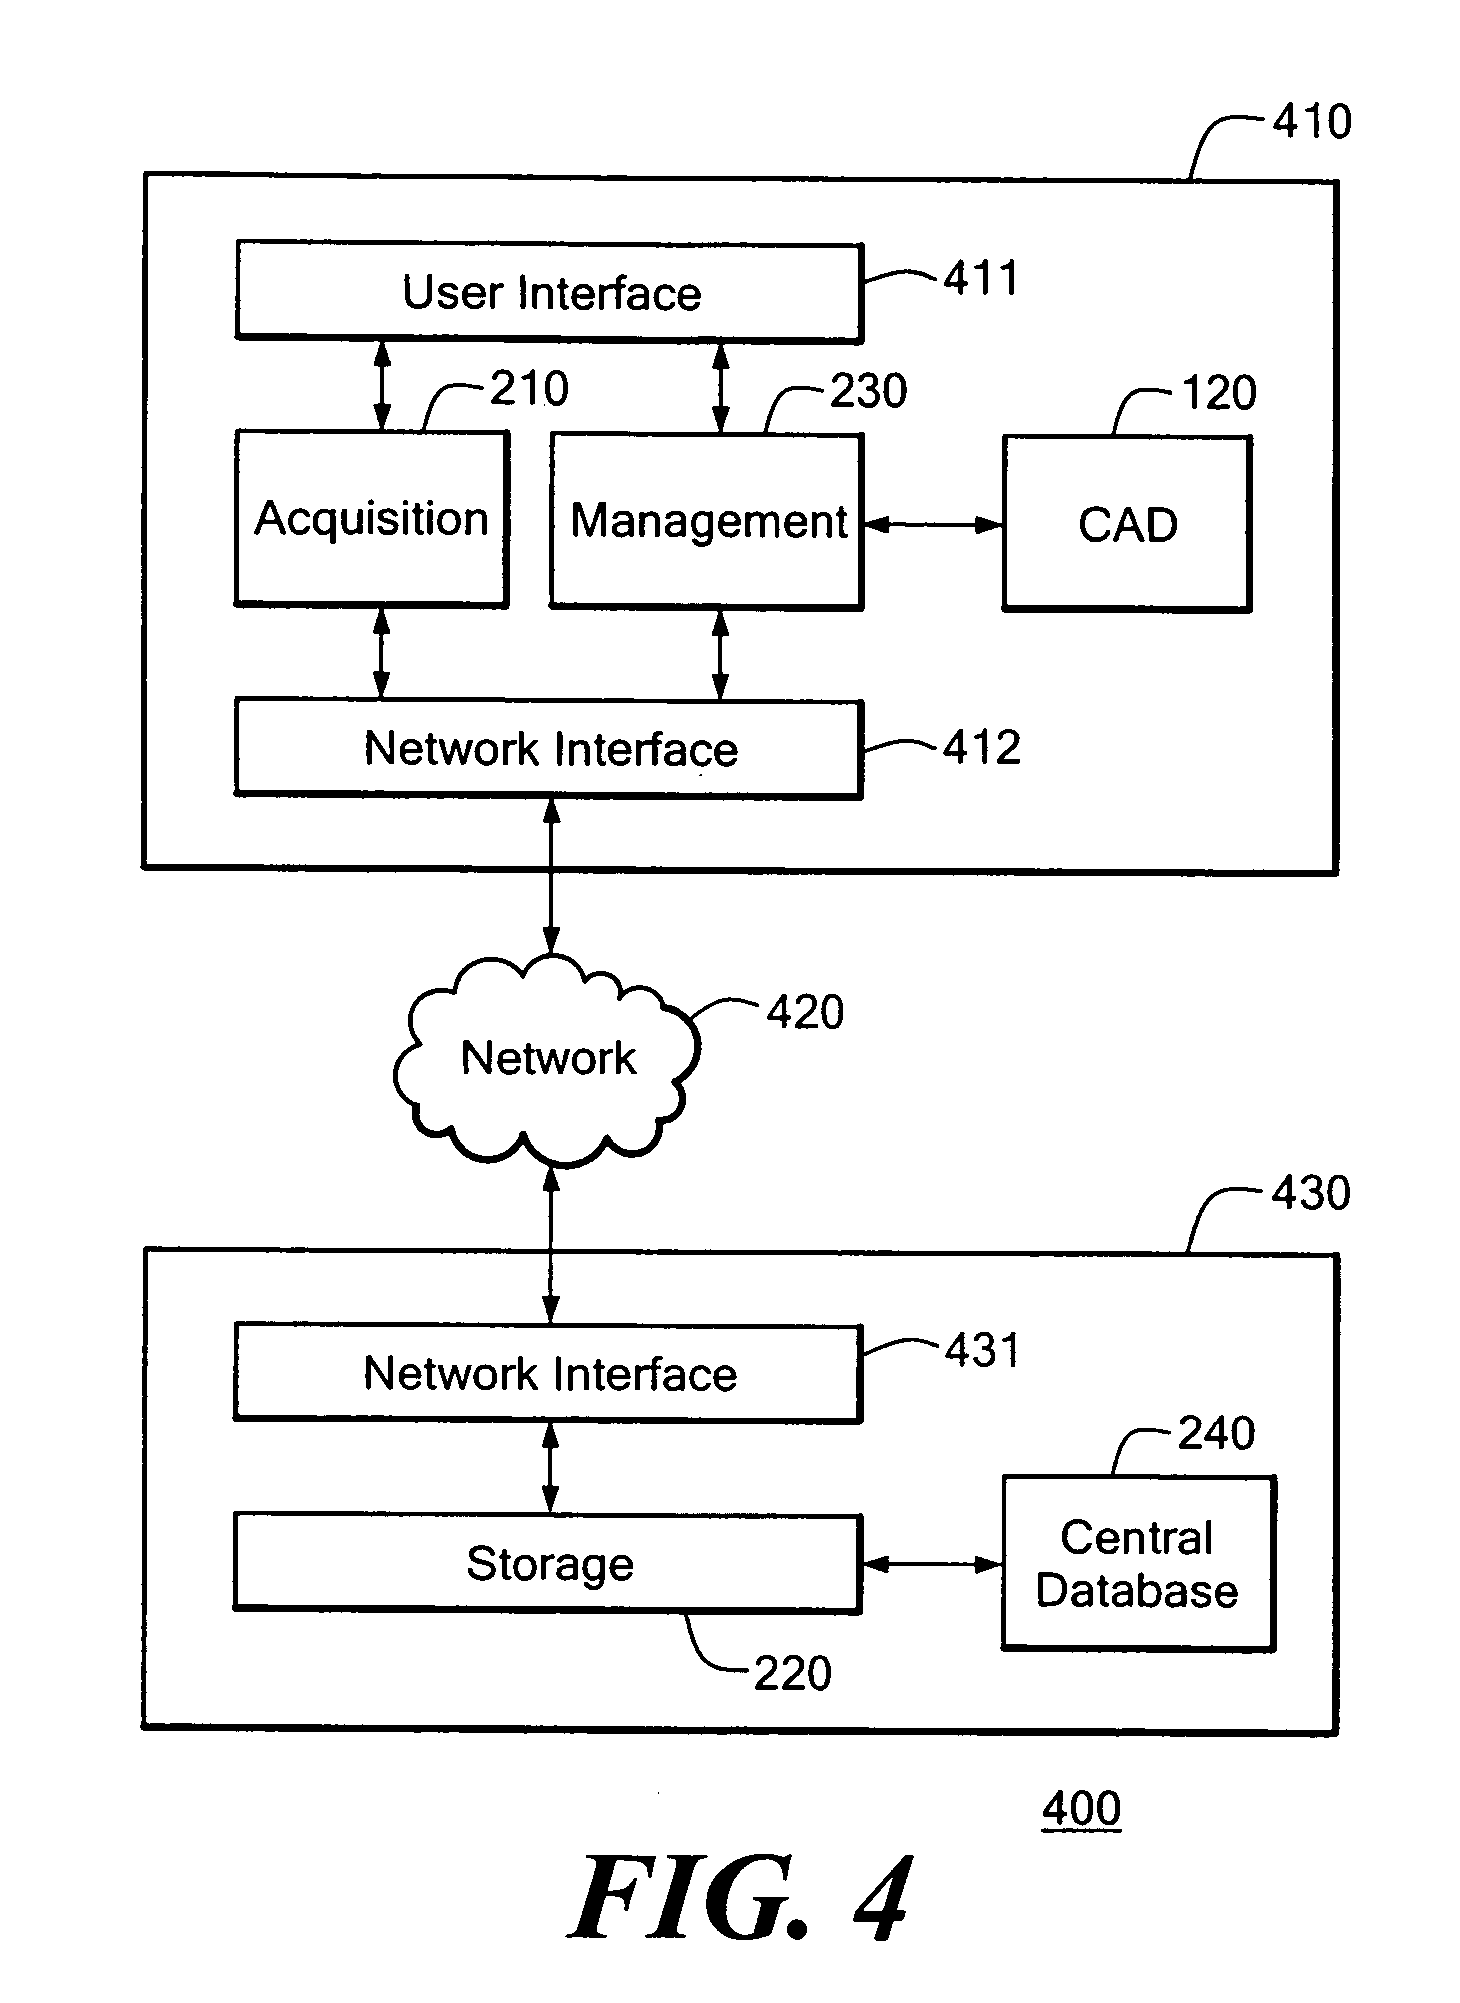 Knowledge management system with integrated product document management for computer-aided design modeling